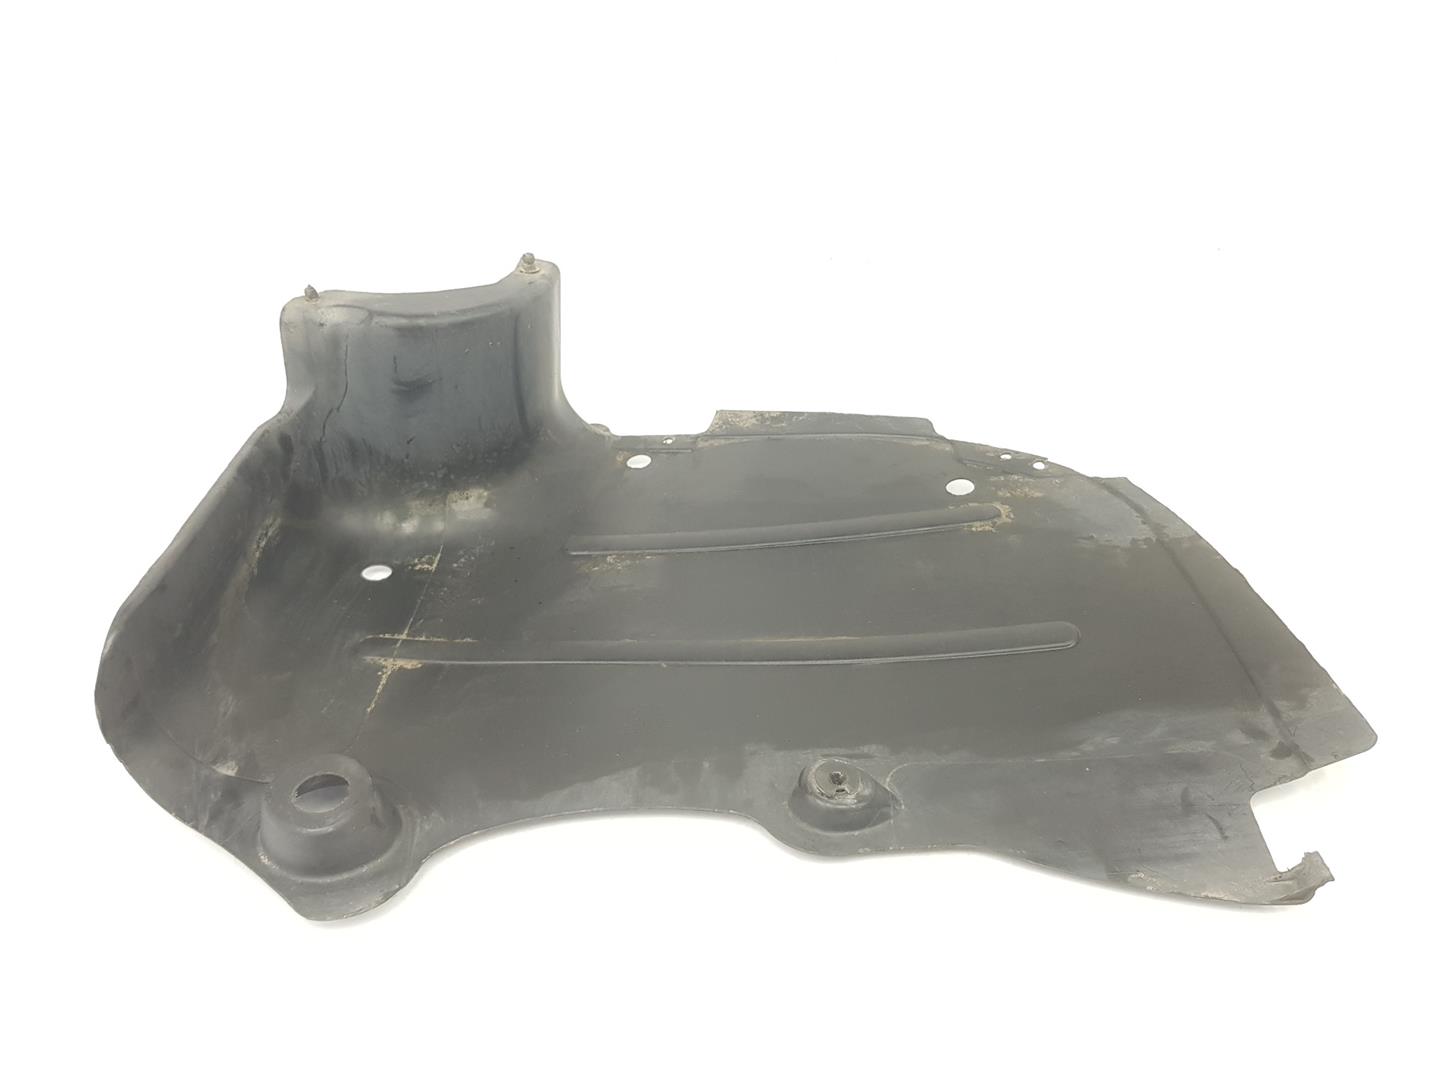 SEAT Exeo 1 generation (2009-2012) Other Interior Parts 8E0825219H, 8E0825219H 22472097